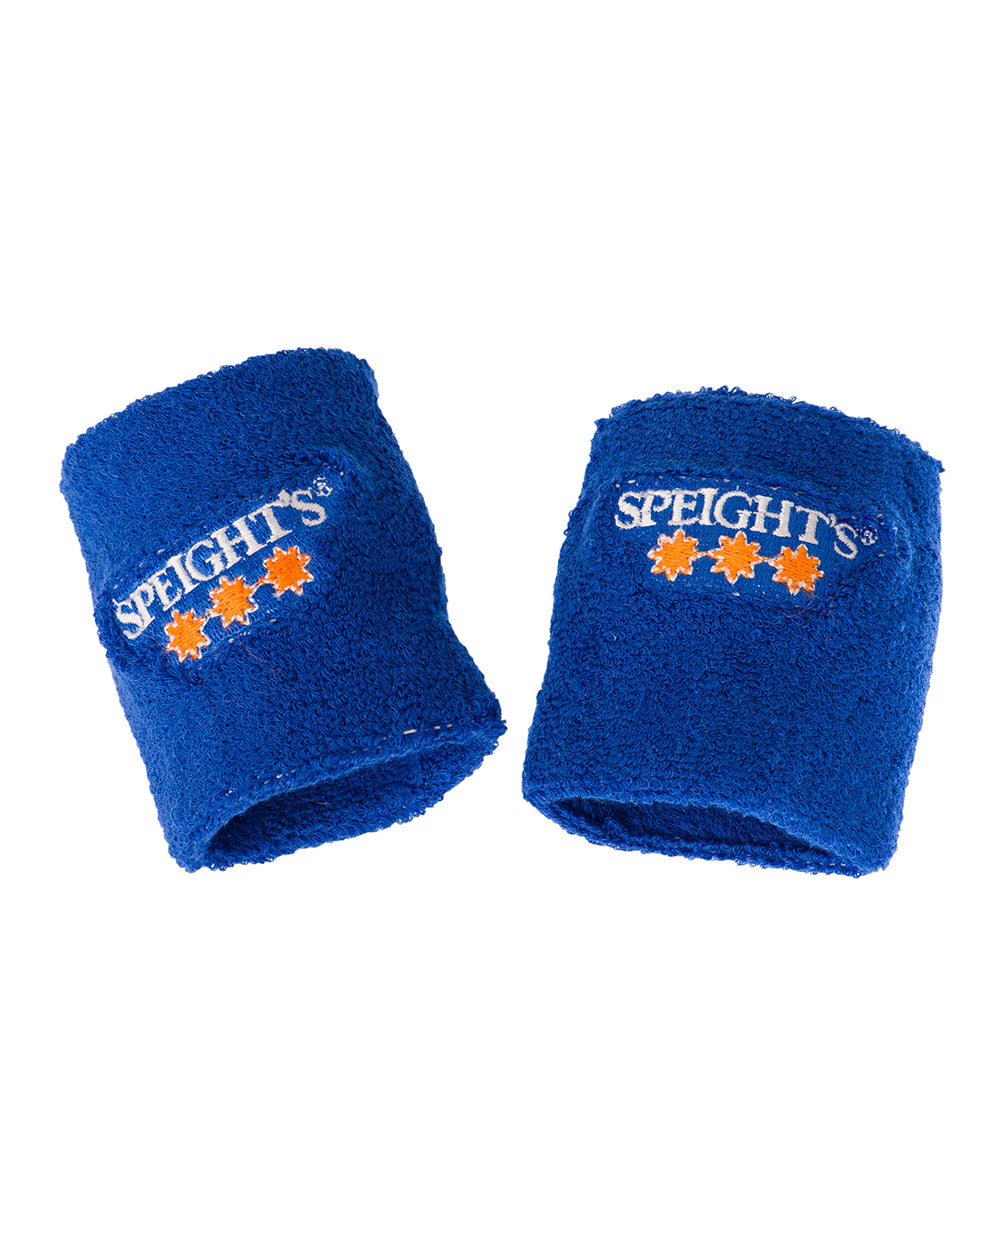 Speight's Sweatbands -  Beer Gear Apparel & Merchandise - Speights - Lion Red - VB - Tokyo Dy merch